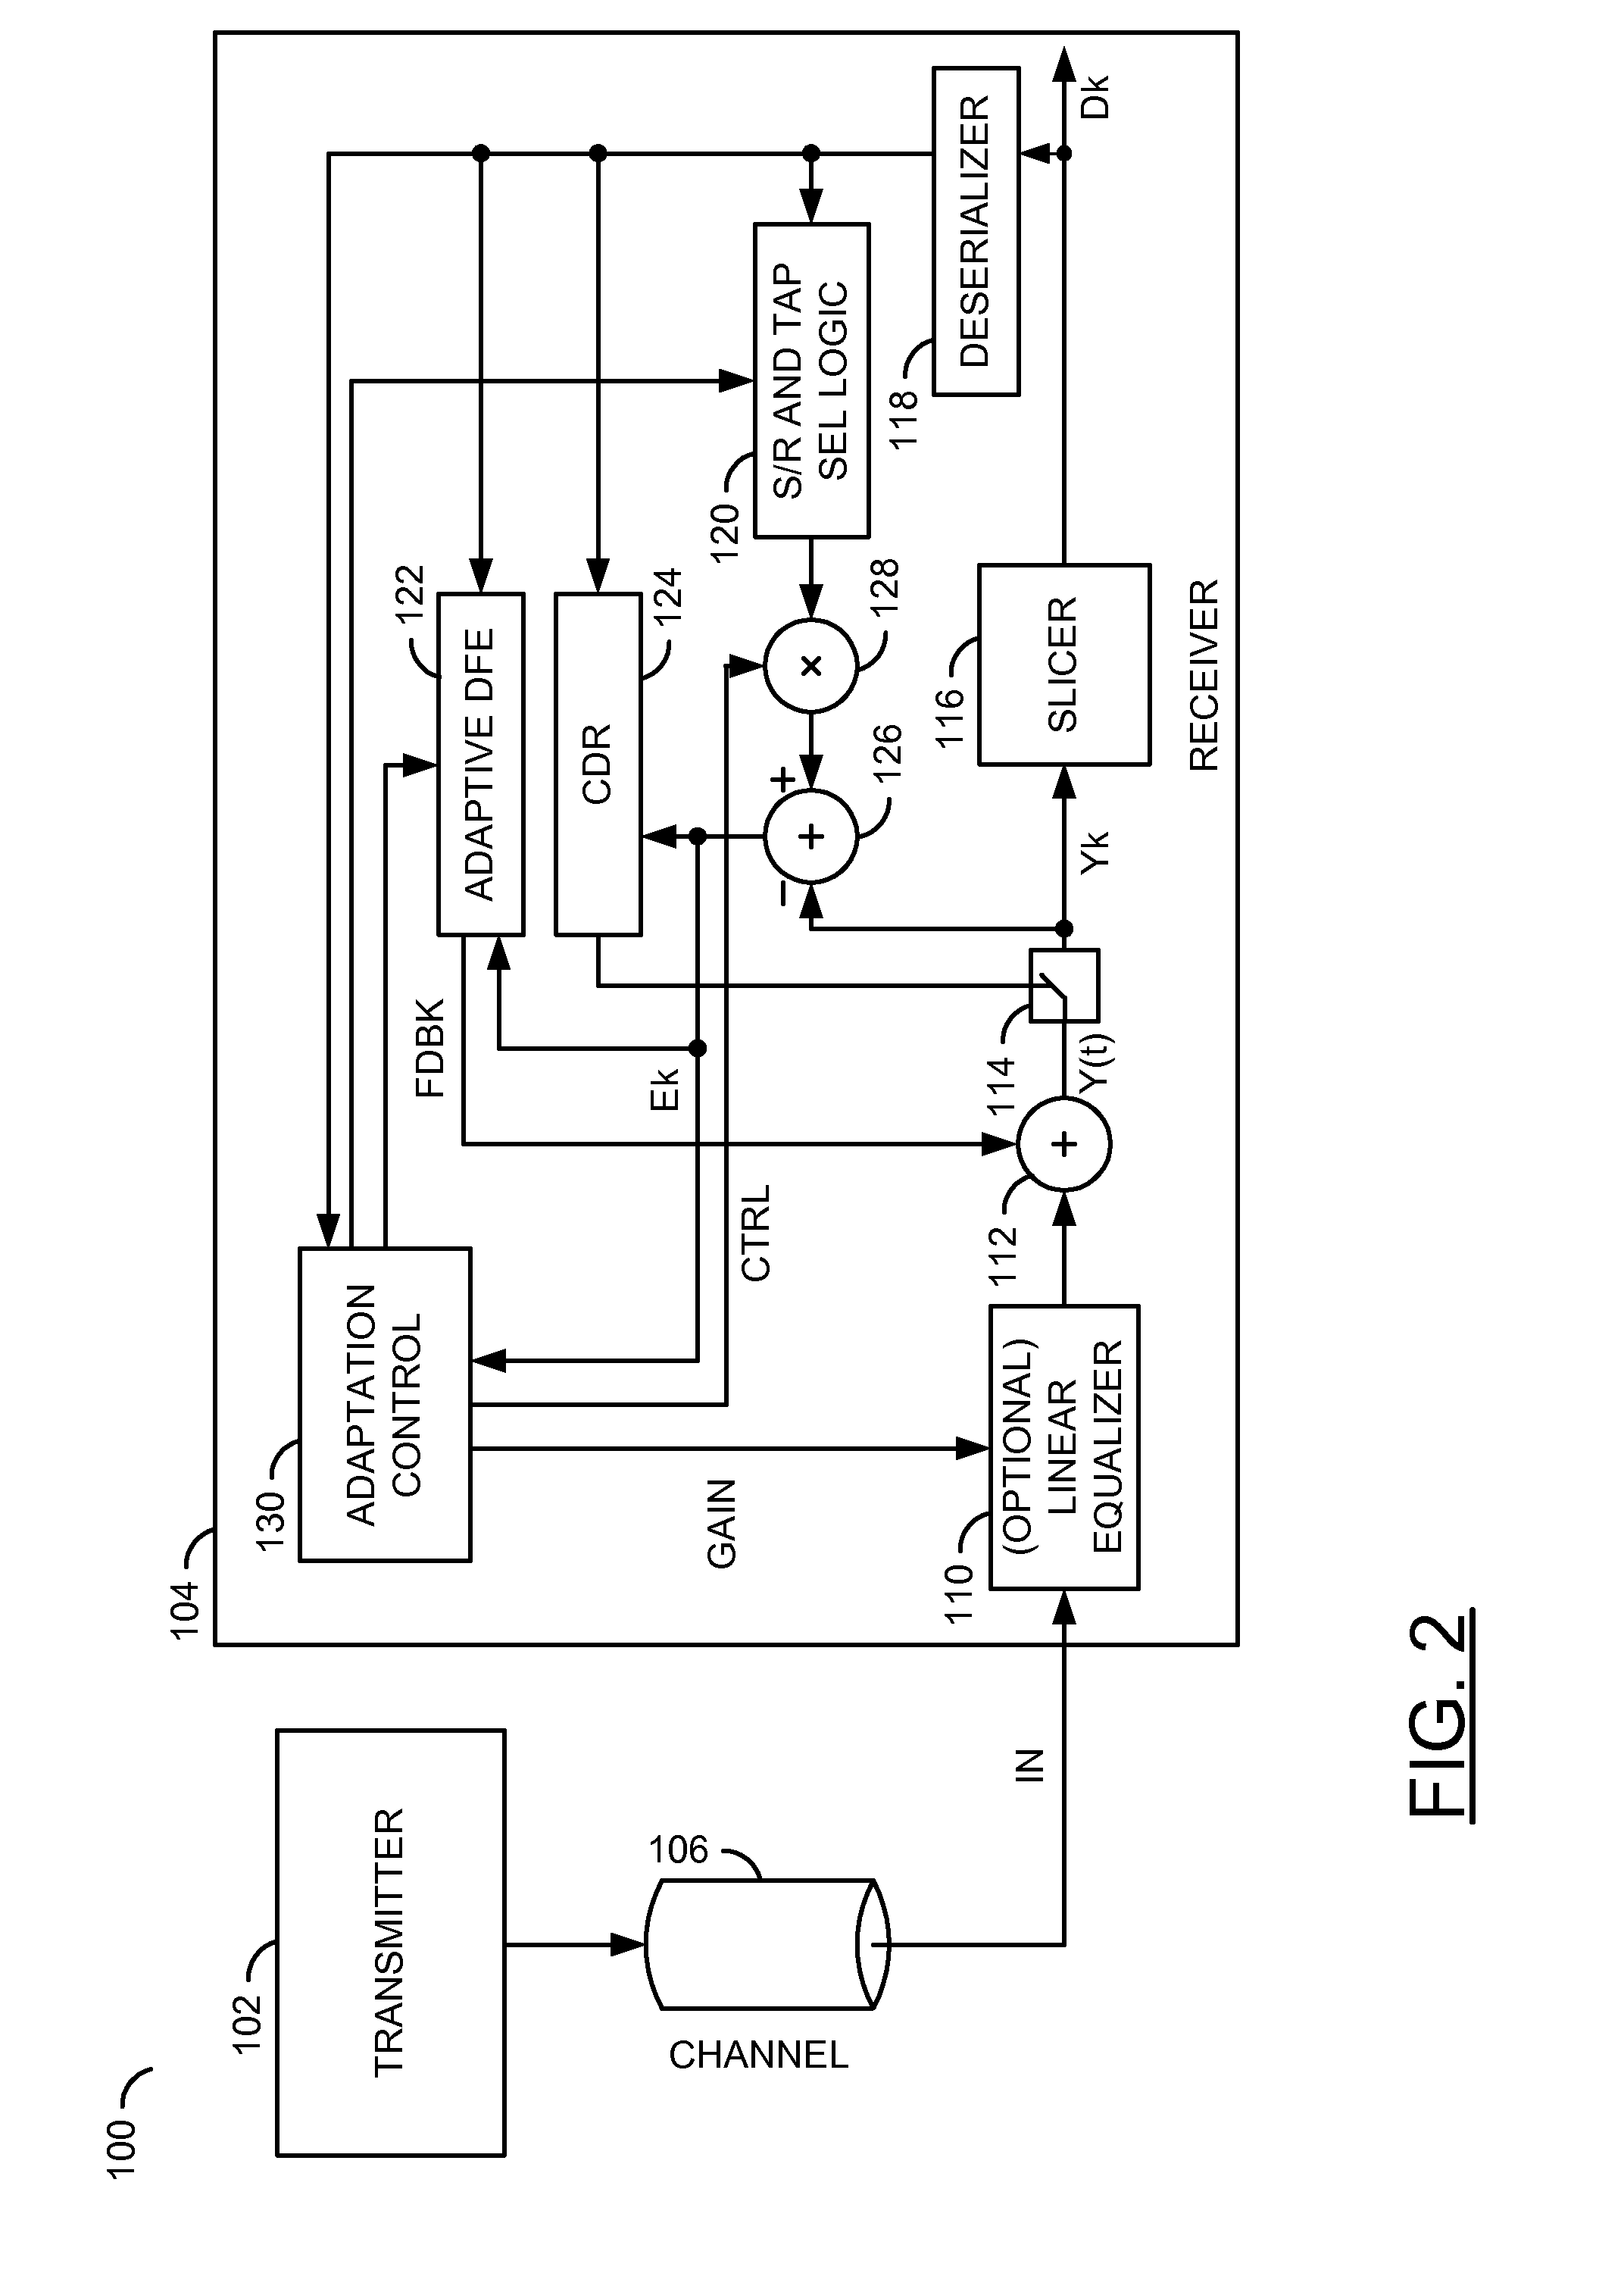 Floating-tap decision feedback equalizer for communication channels with severe reflection